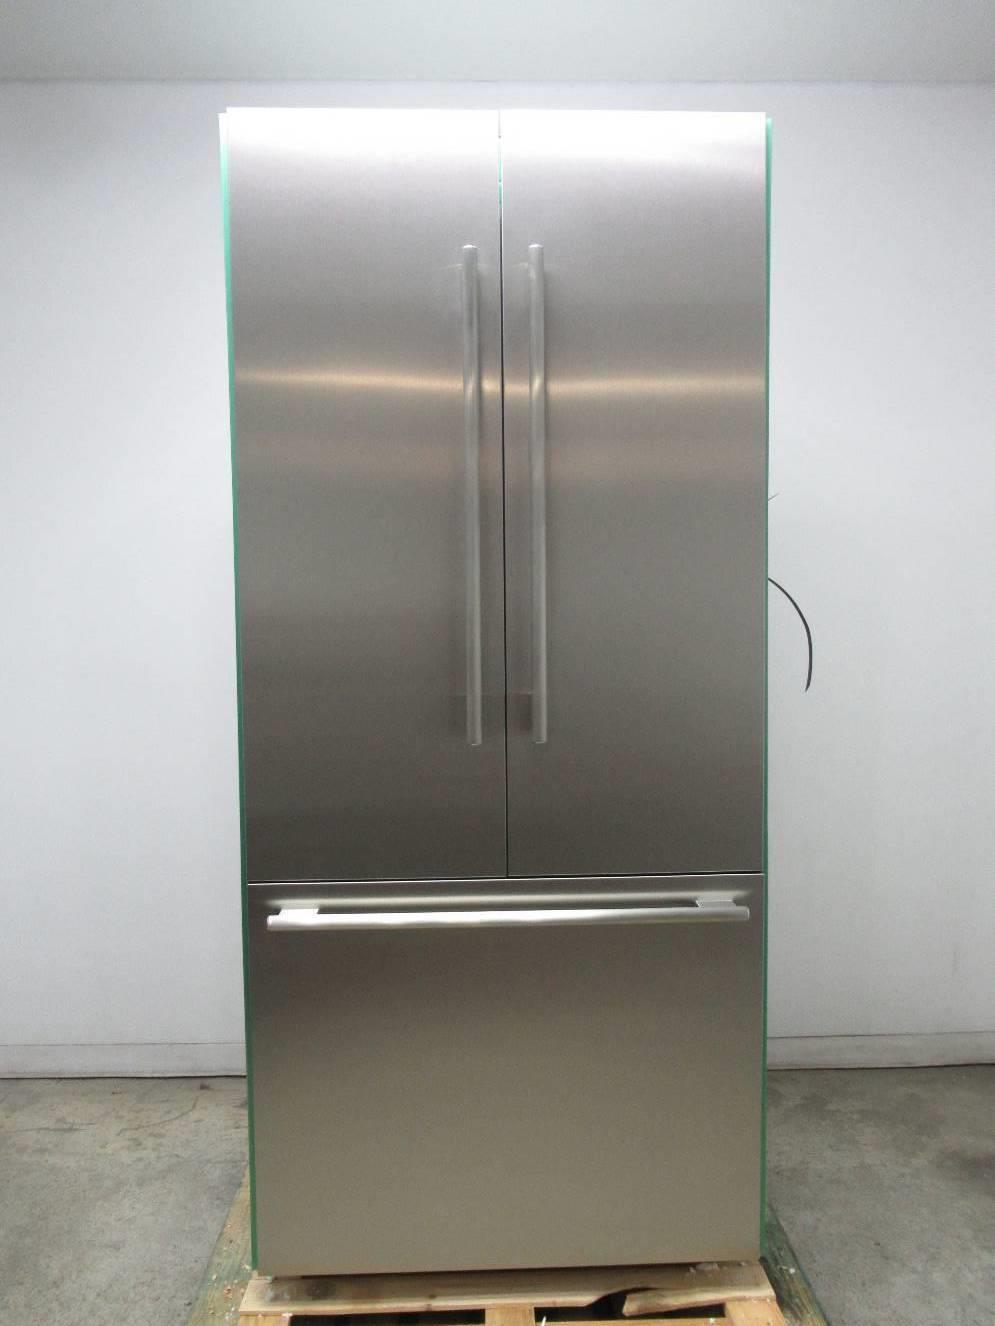 Thermador Freedom Masterpiece Series 36" SS French Door Refrigerator